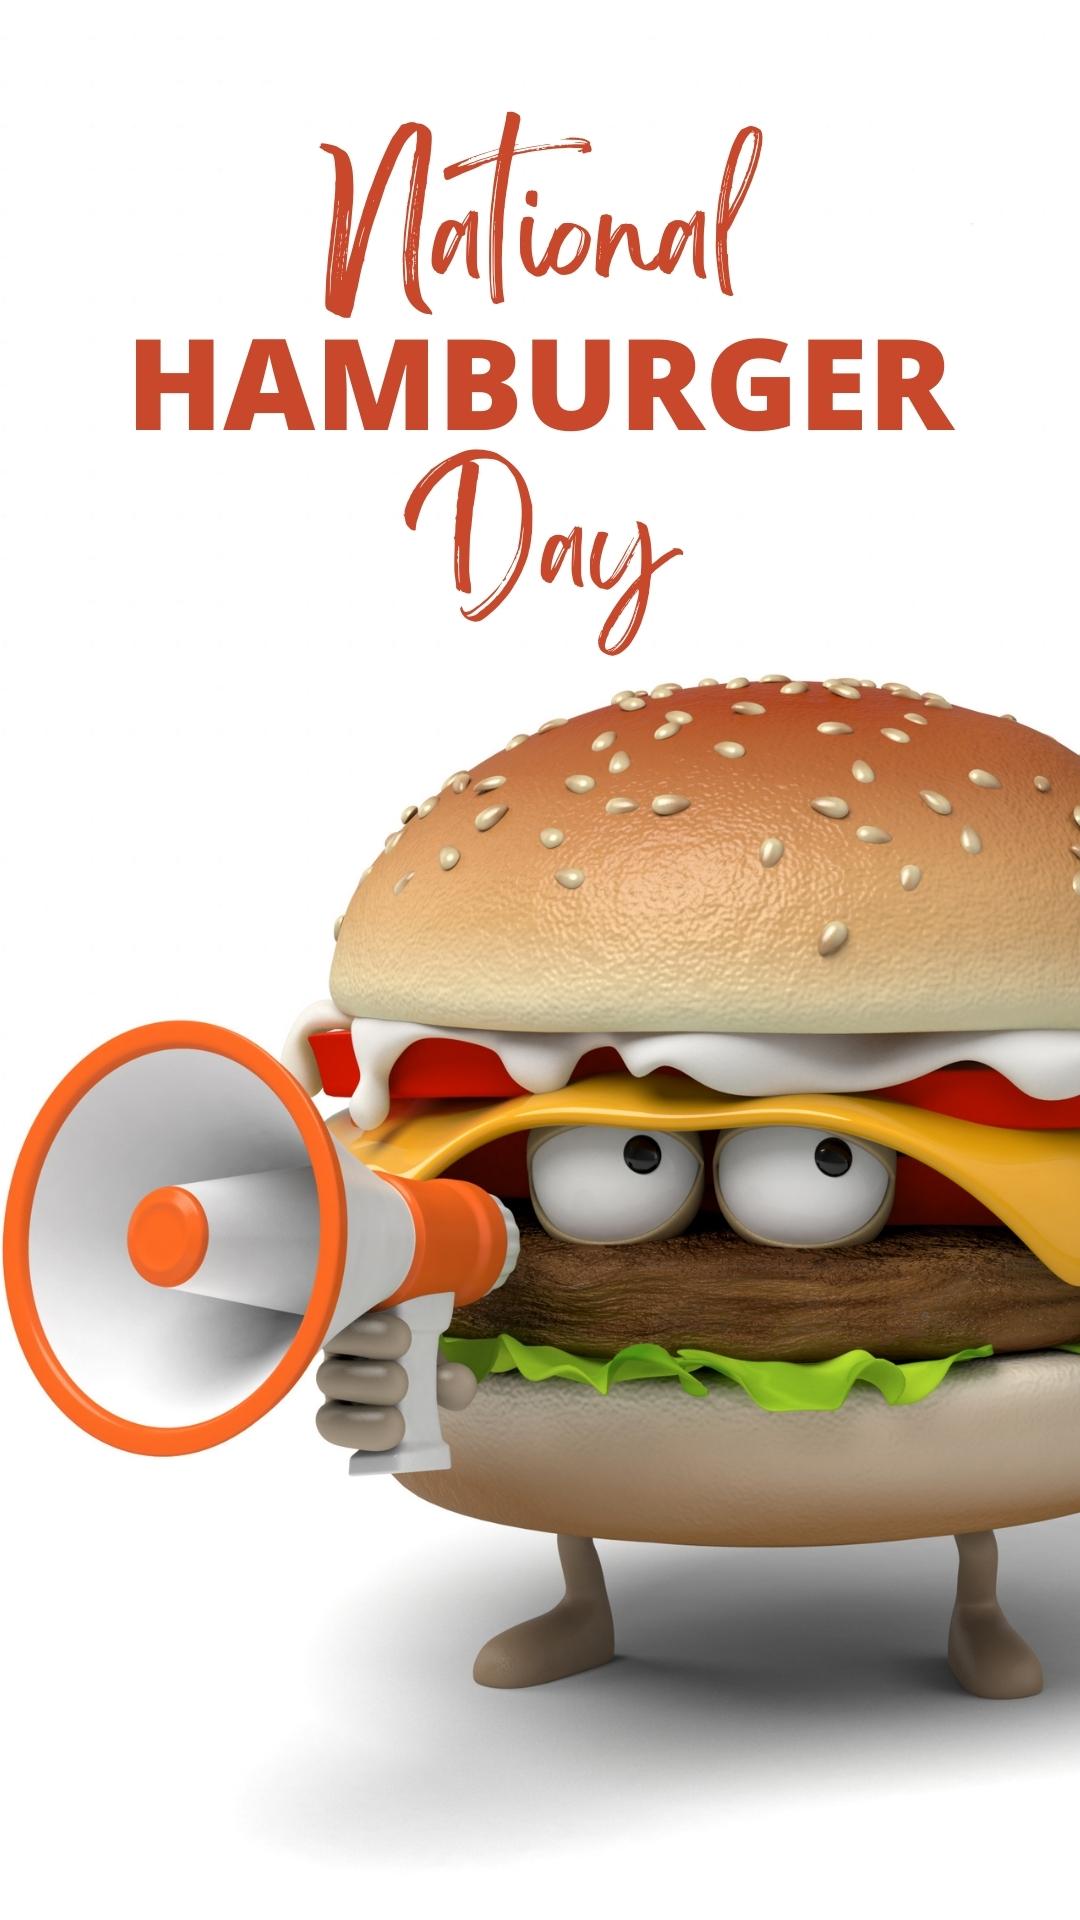 best national hamburger day wishes images for instagram post (45)